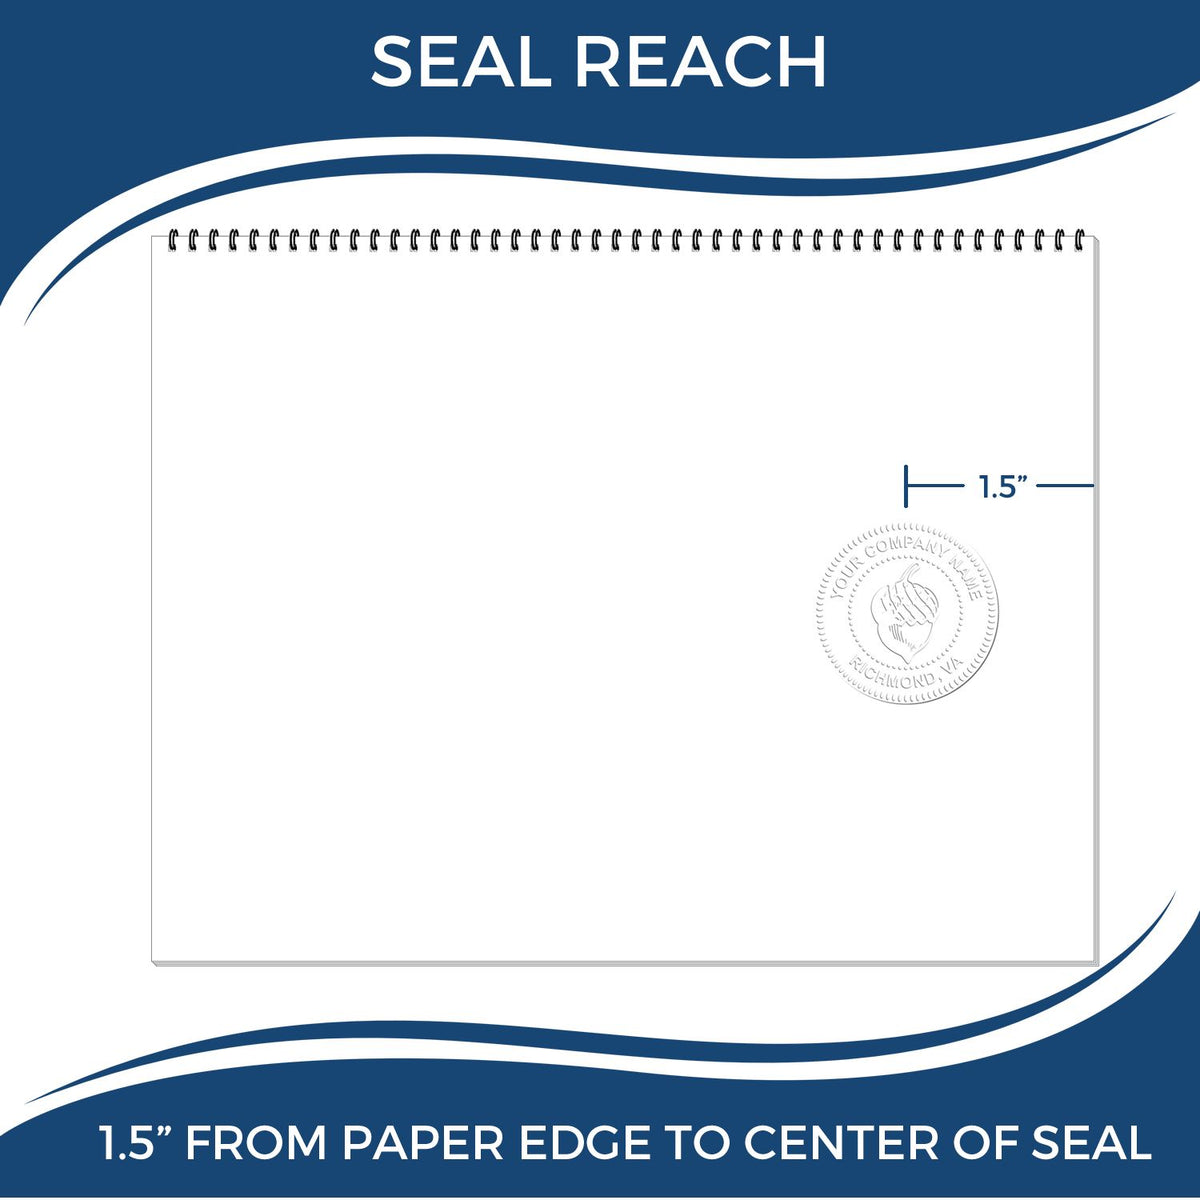 An infographic showing the seal reach which is represented by a ruler and a miniature seal image of the Hybrid Nebraska Geologist Seal